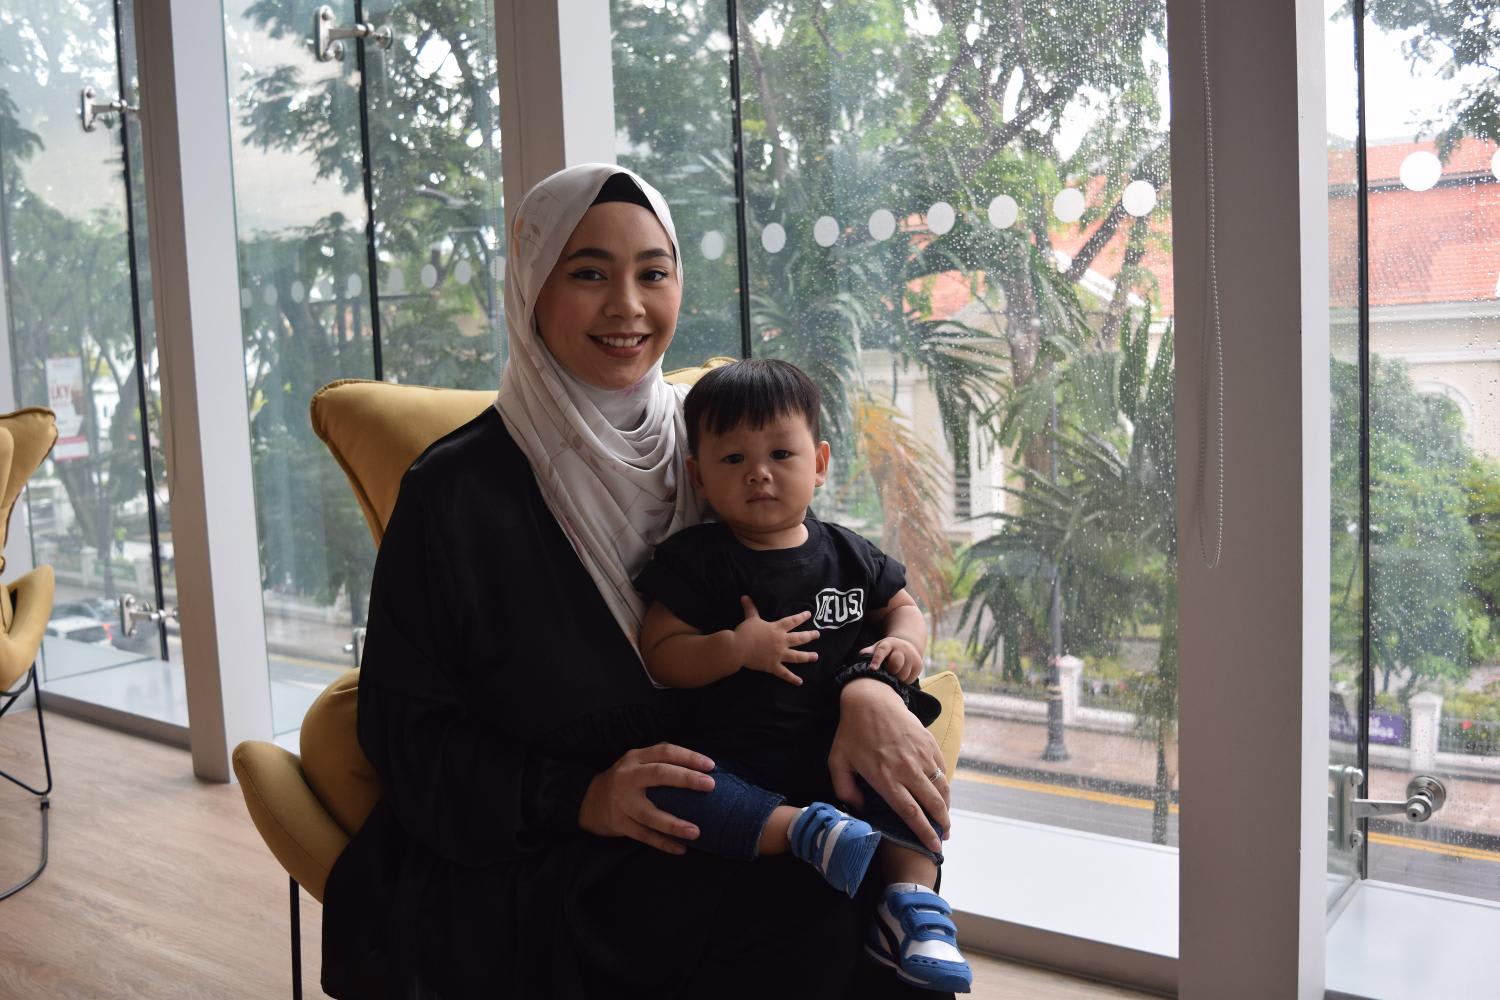 Ms Nur Saiyidah Mohd Nordin juggled taking of her children with picking up new skills to pursue a career in logistics. Photos: NTUC LearningHub